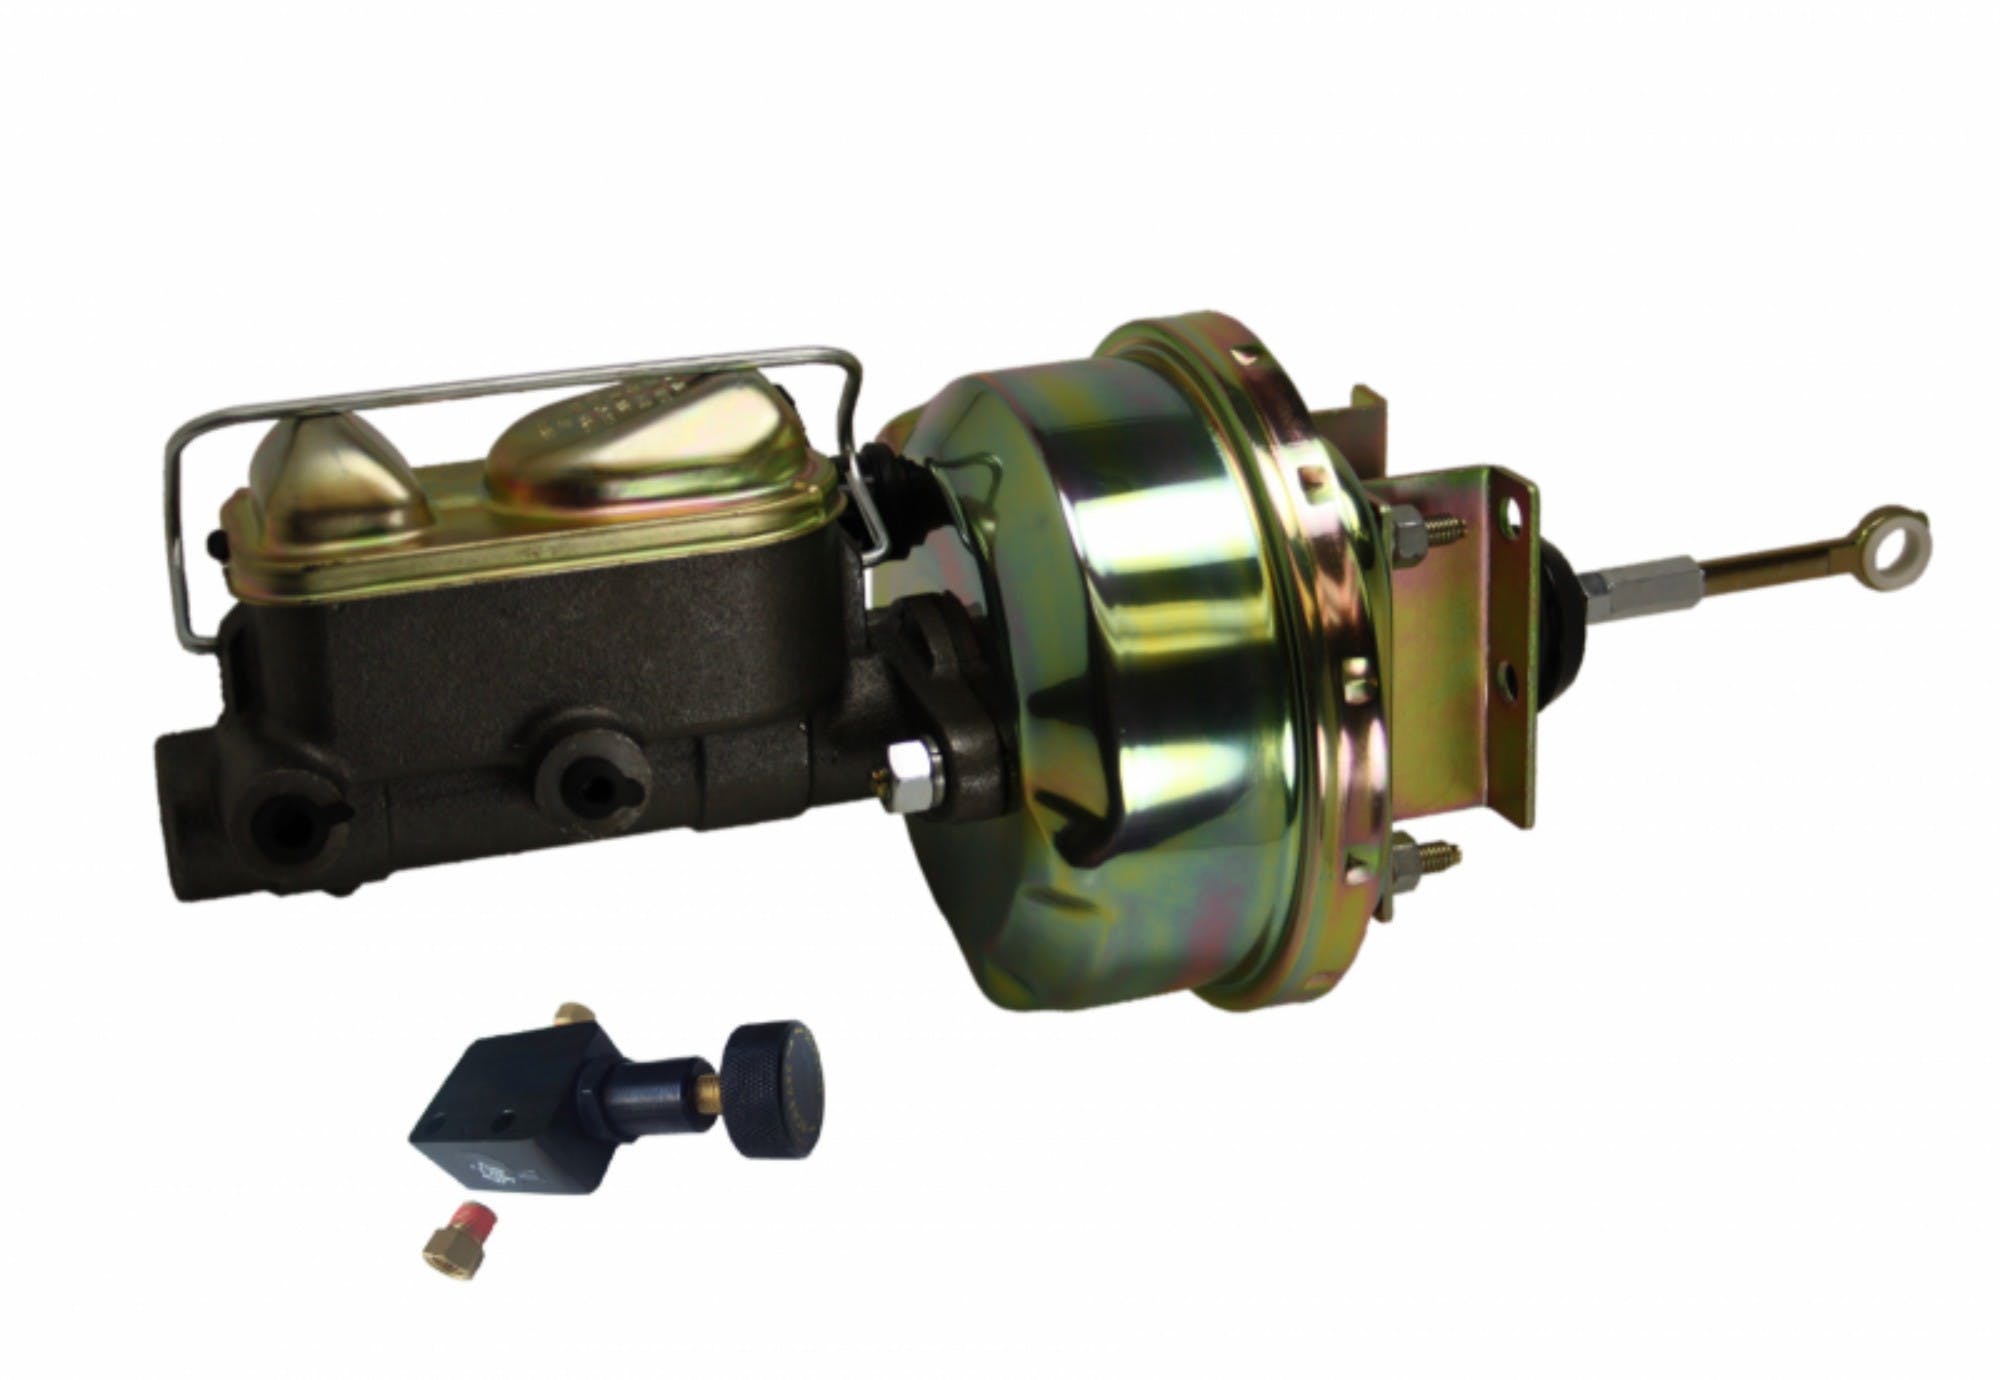 LEED Brakes 5H405 7 in Power Brake Booster , 1 in Bore Master and Adj Valve (zinc)